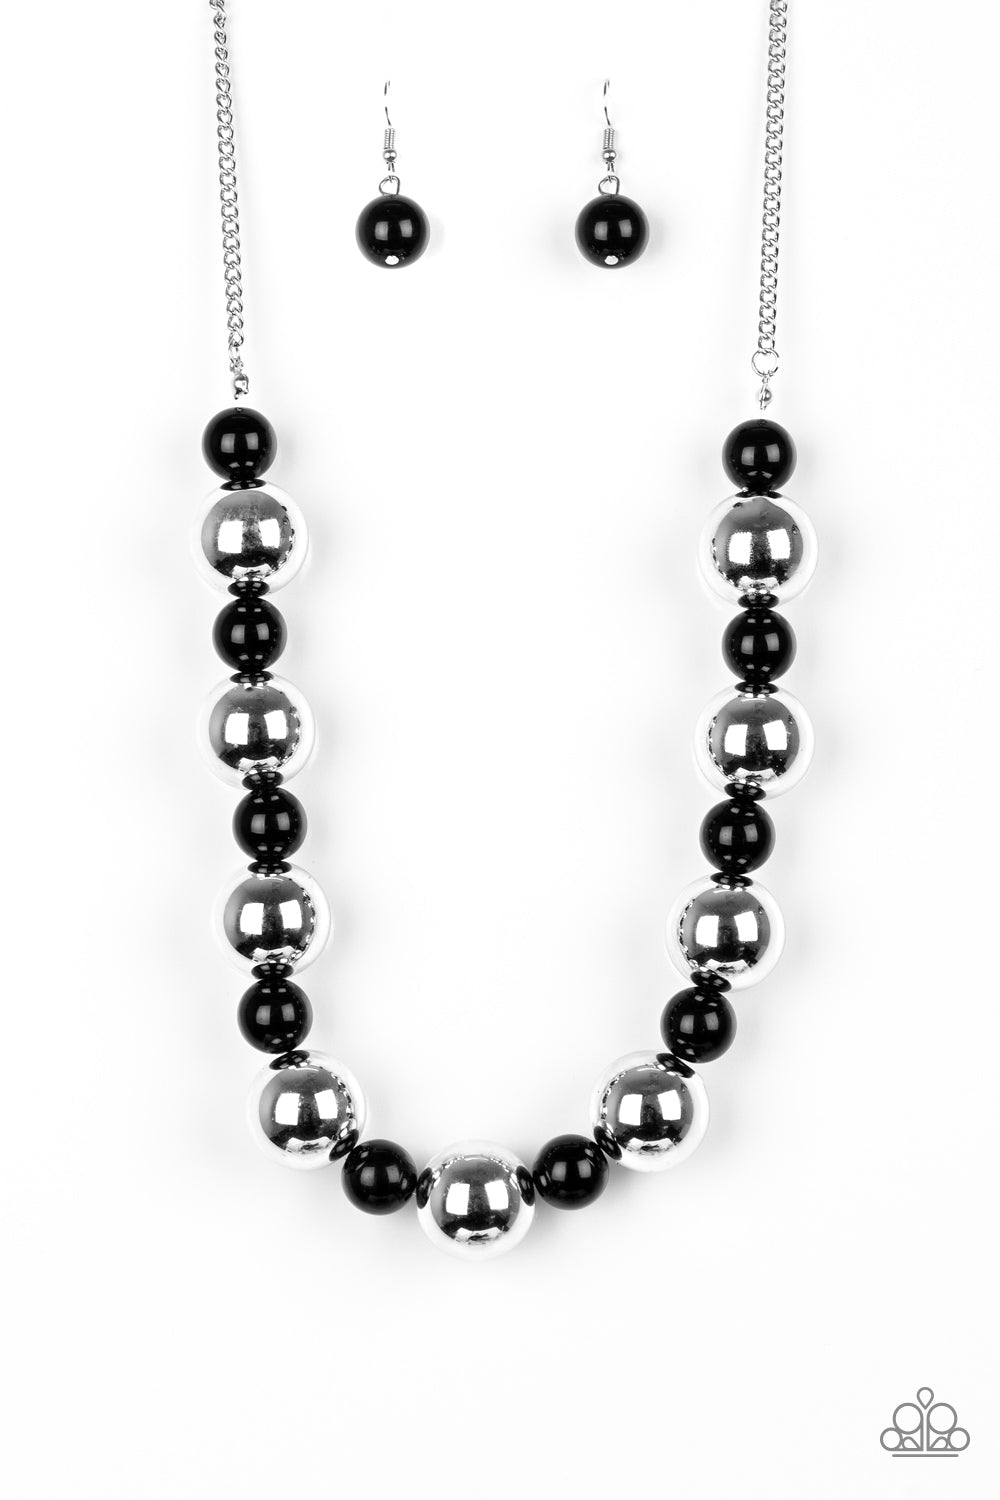 Polished black beads and dramatic silver beads drape below the collar for a perfect pop of color. Features an adjustable clasp closure.